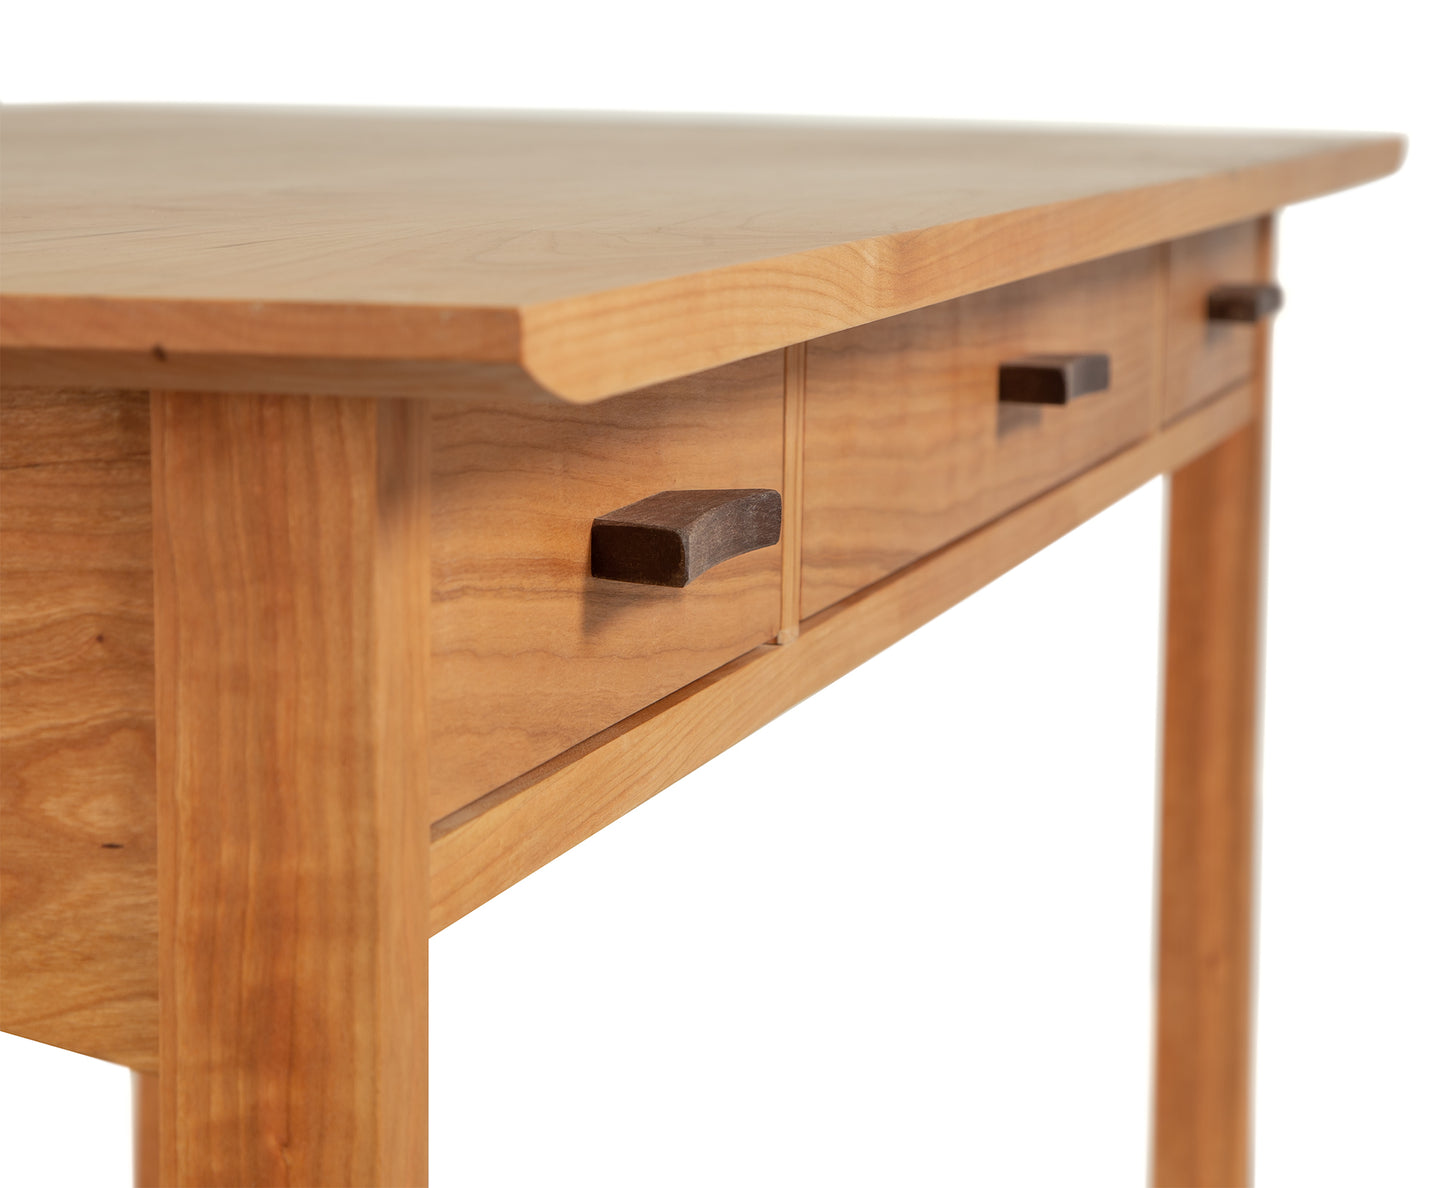 Contemporary Craftsman Library Desk, solid Cherry Maple Walnut with a visible drawer and tapered legs, isolated on a white background, by Vermont Furniture Designs.